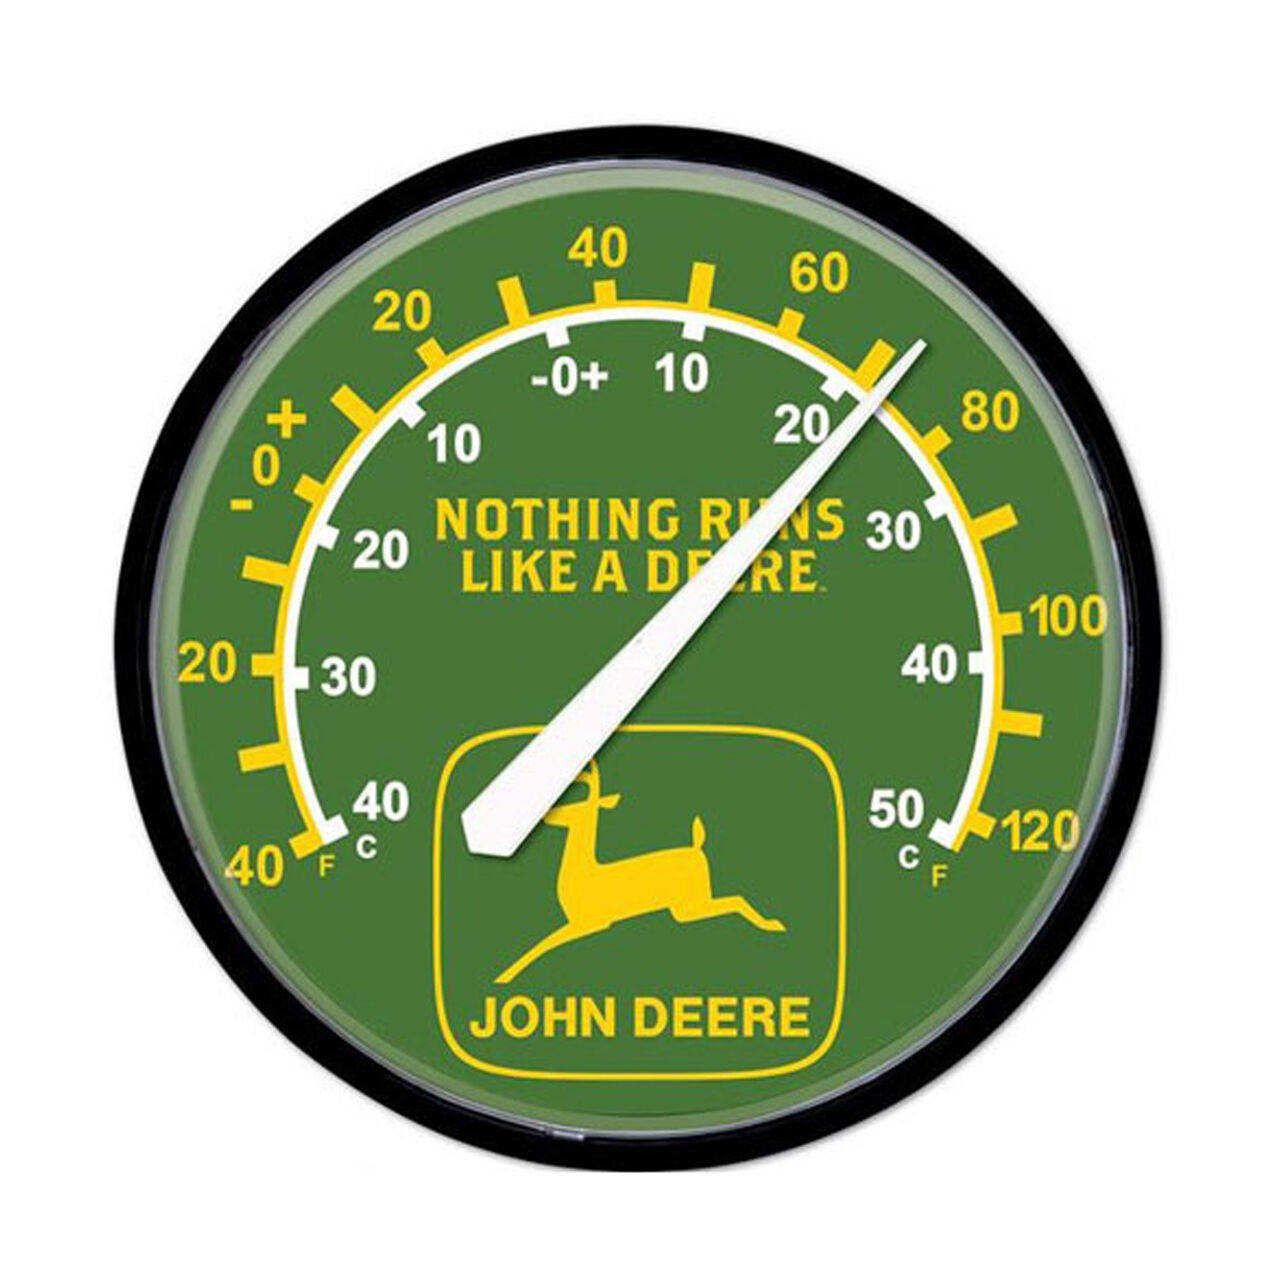 John Deere Green Nothing Runs Like a Deere Round Thermometer LP79696,  image number 1